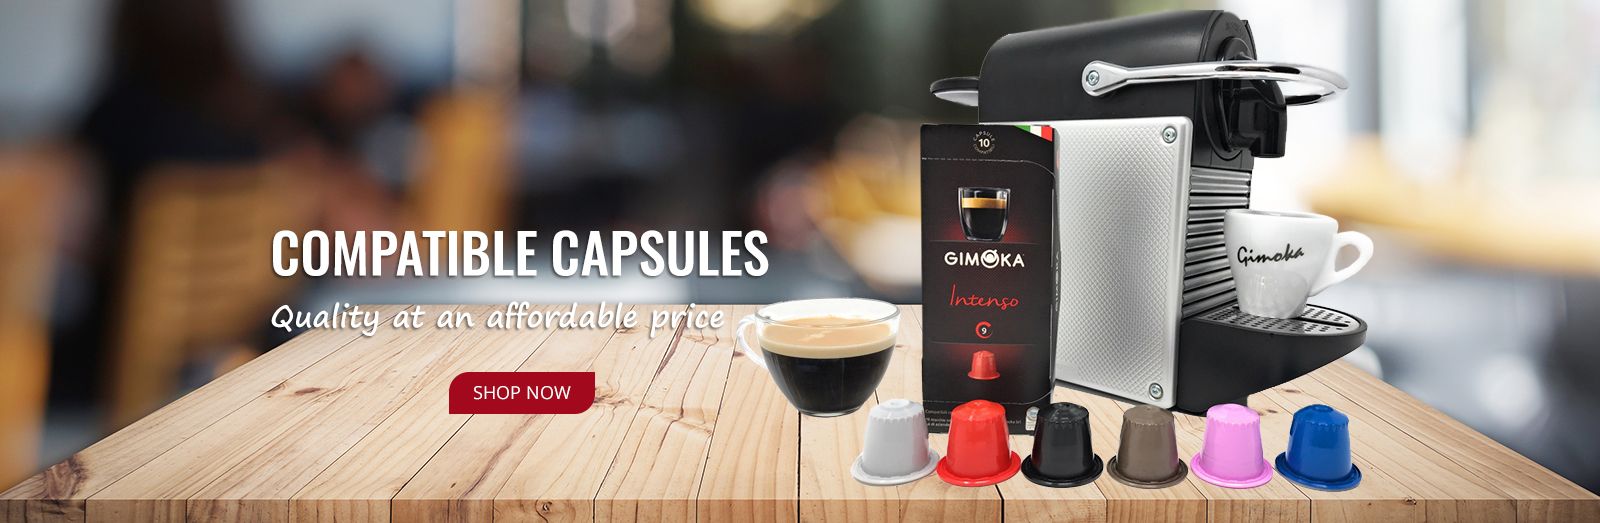 Nespresso Machine and Capsules: The Best Way To Start Your Morning